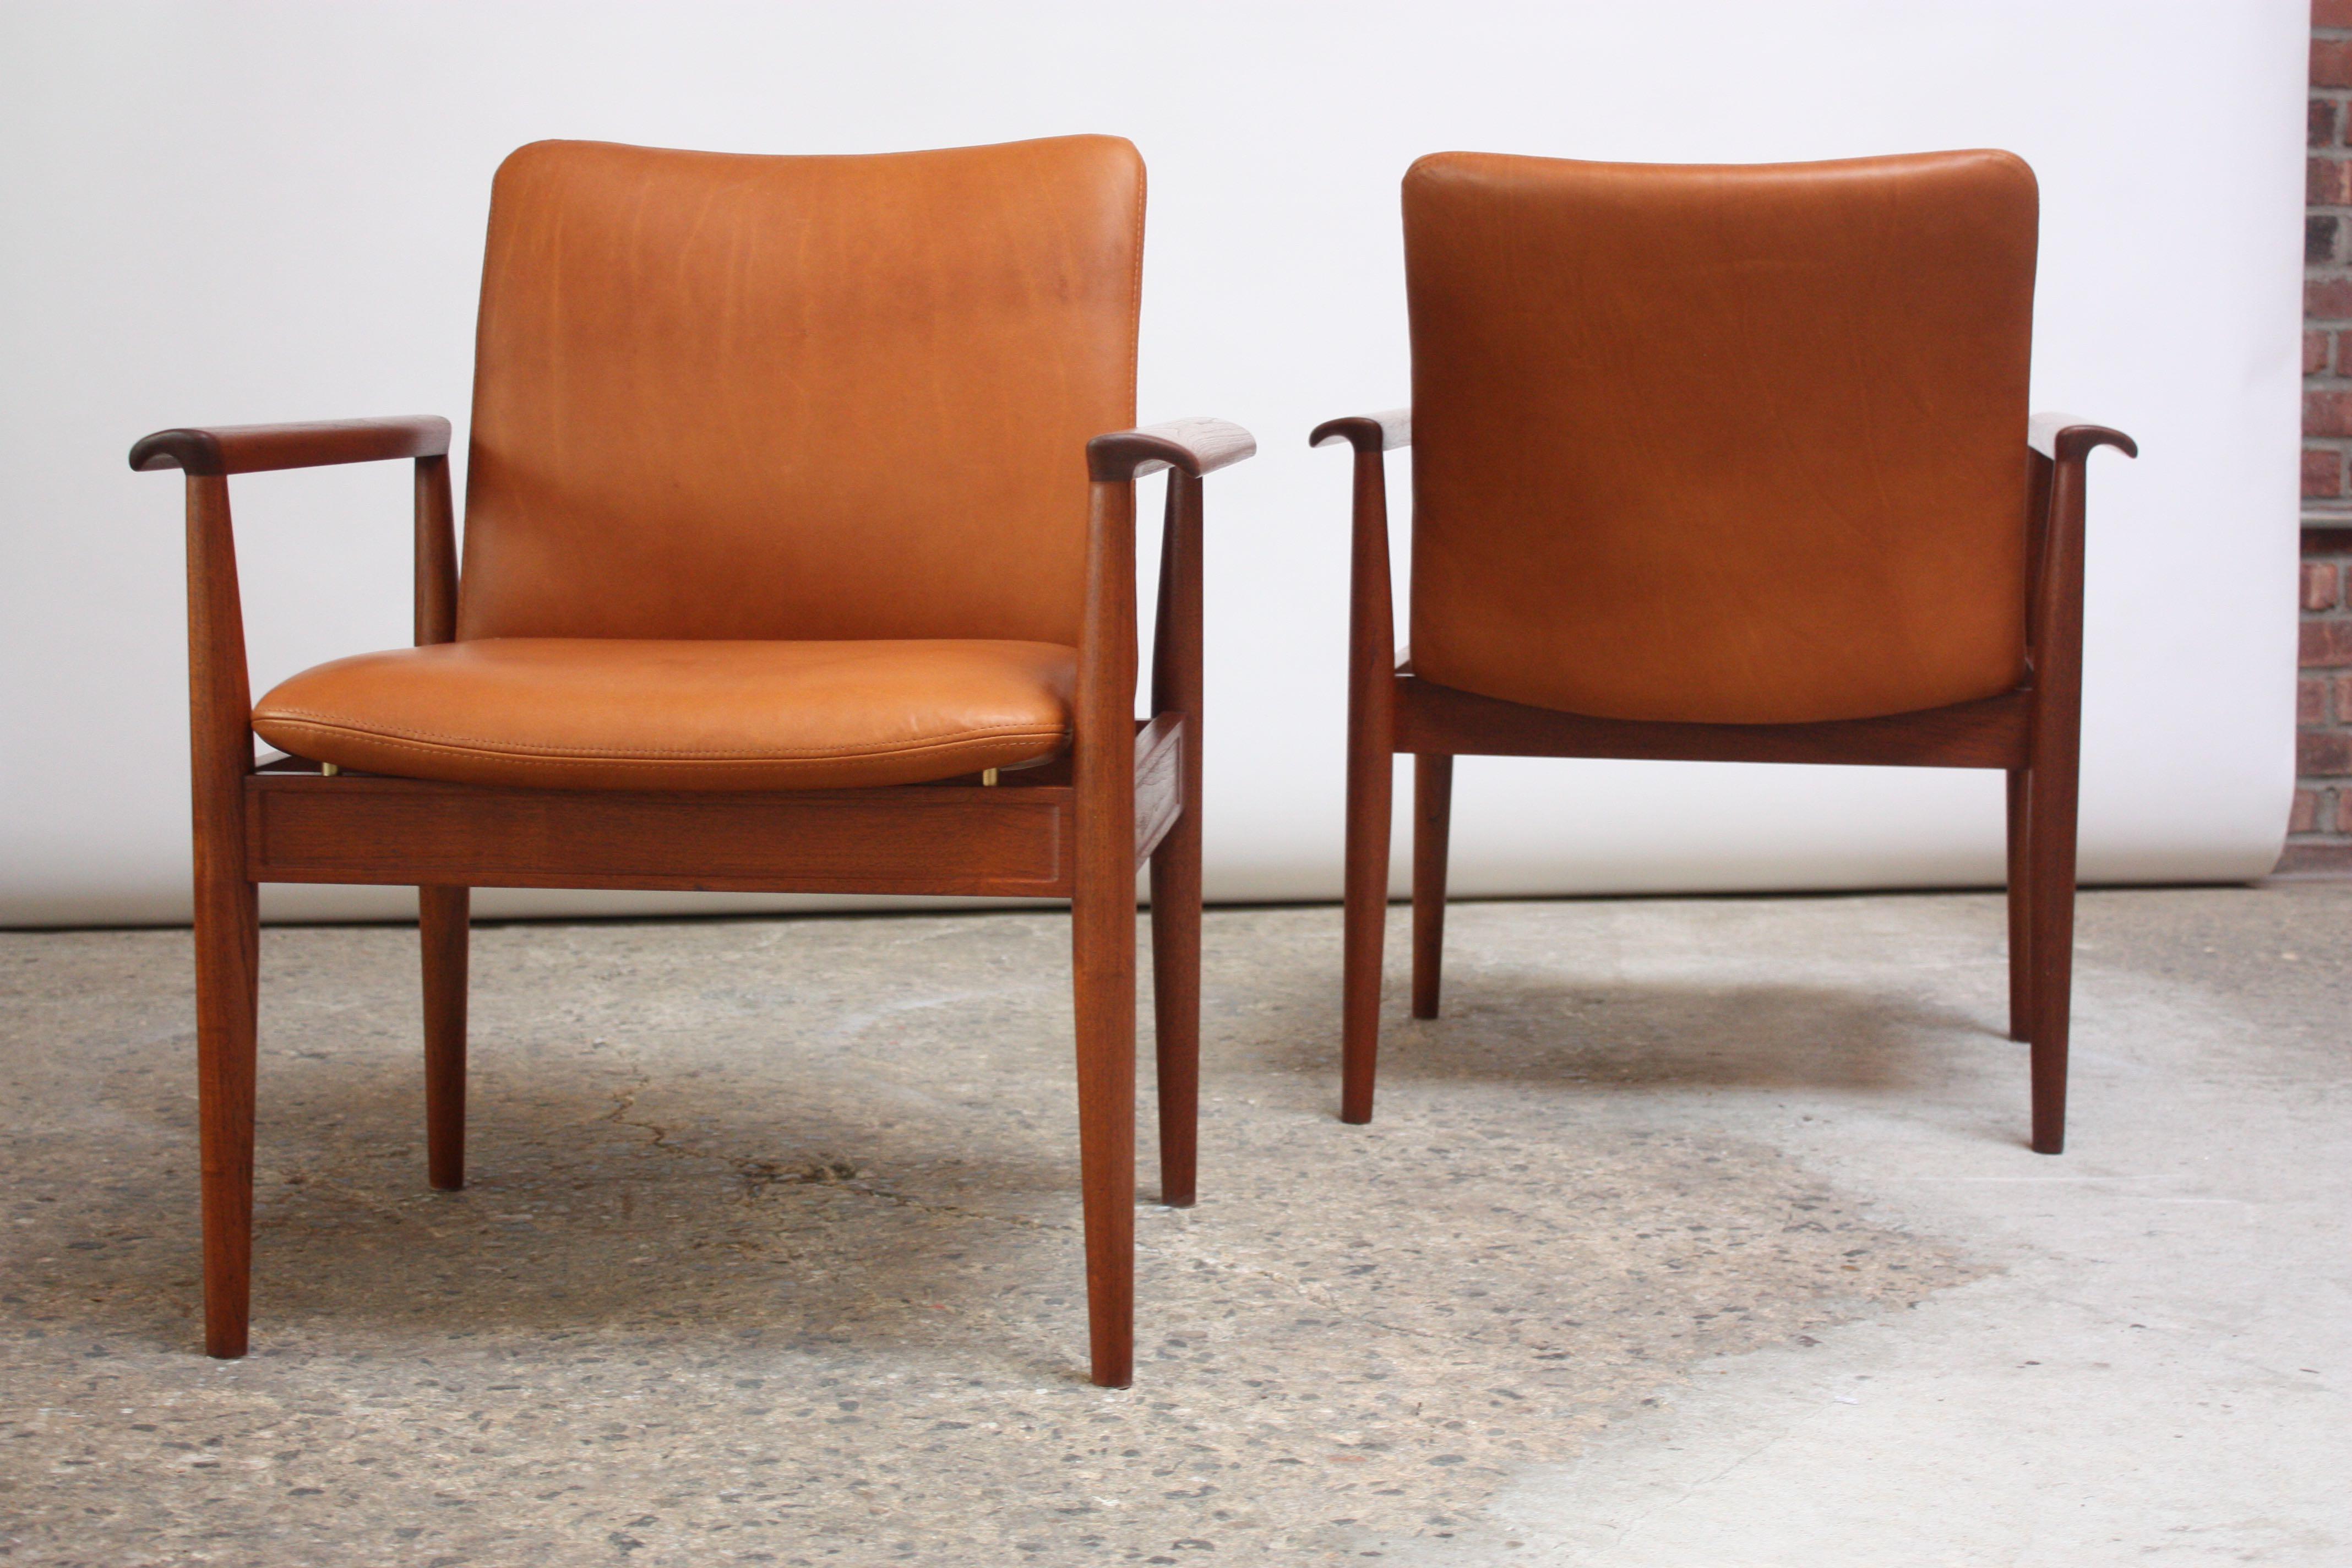 These teak 'Diplomat Chairs' were designed by Finn Juhl for France & Son circa 1961 and feature deeply sculpted arms and clean lines throughout. Leather seats mount to brass posts which connect to the frame, giving the chairs a floating